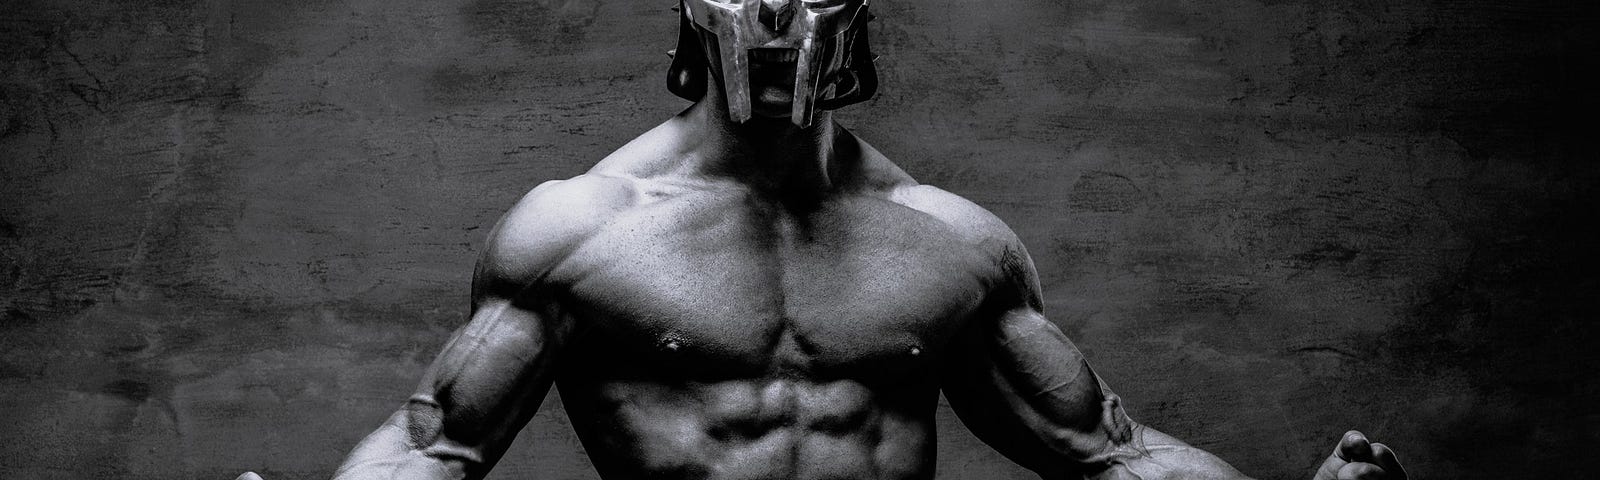 Image of a shirtless, muscleman in a metal mask in a “come and get me” stance with muscles flexed, looking fierce and ready to kill.